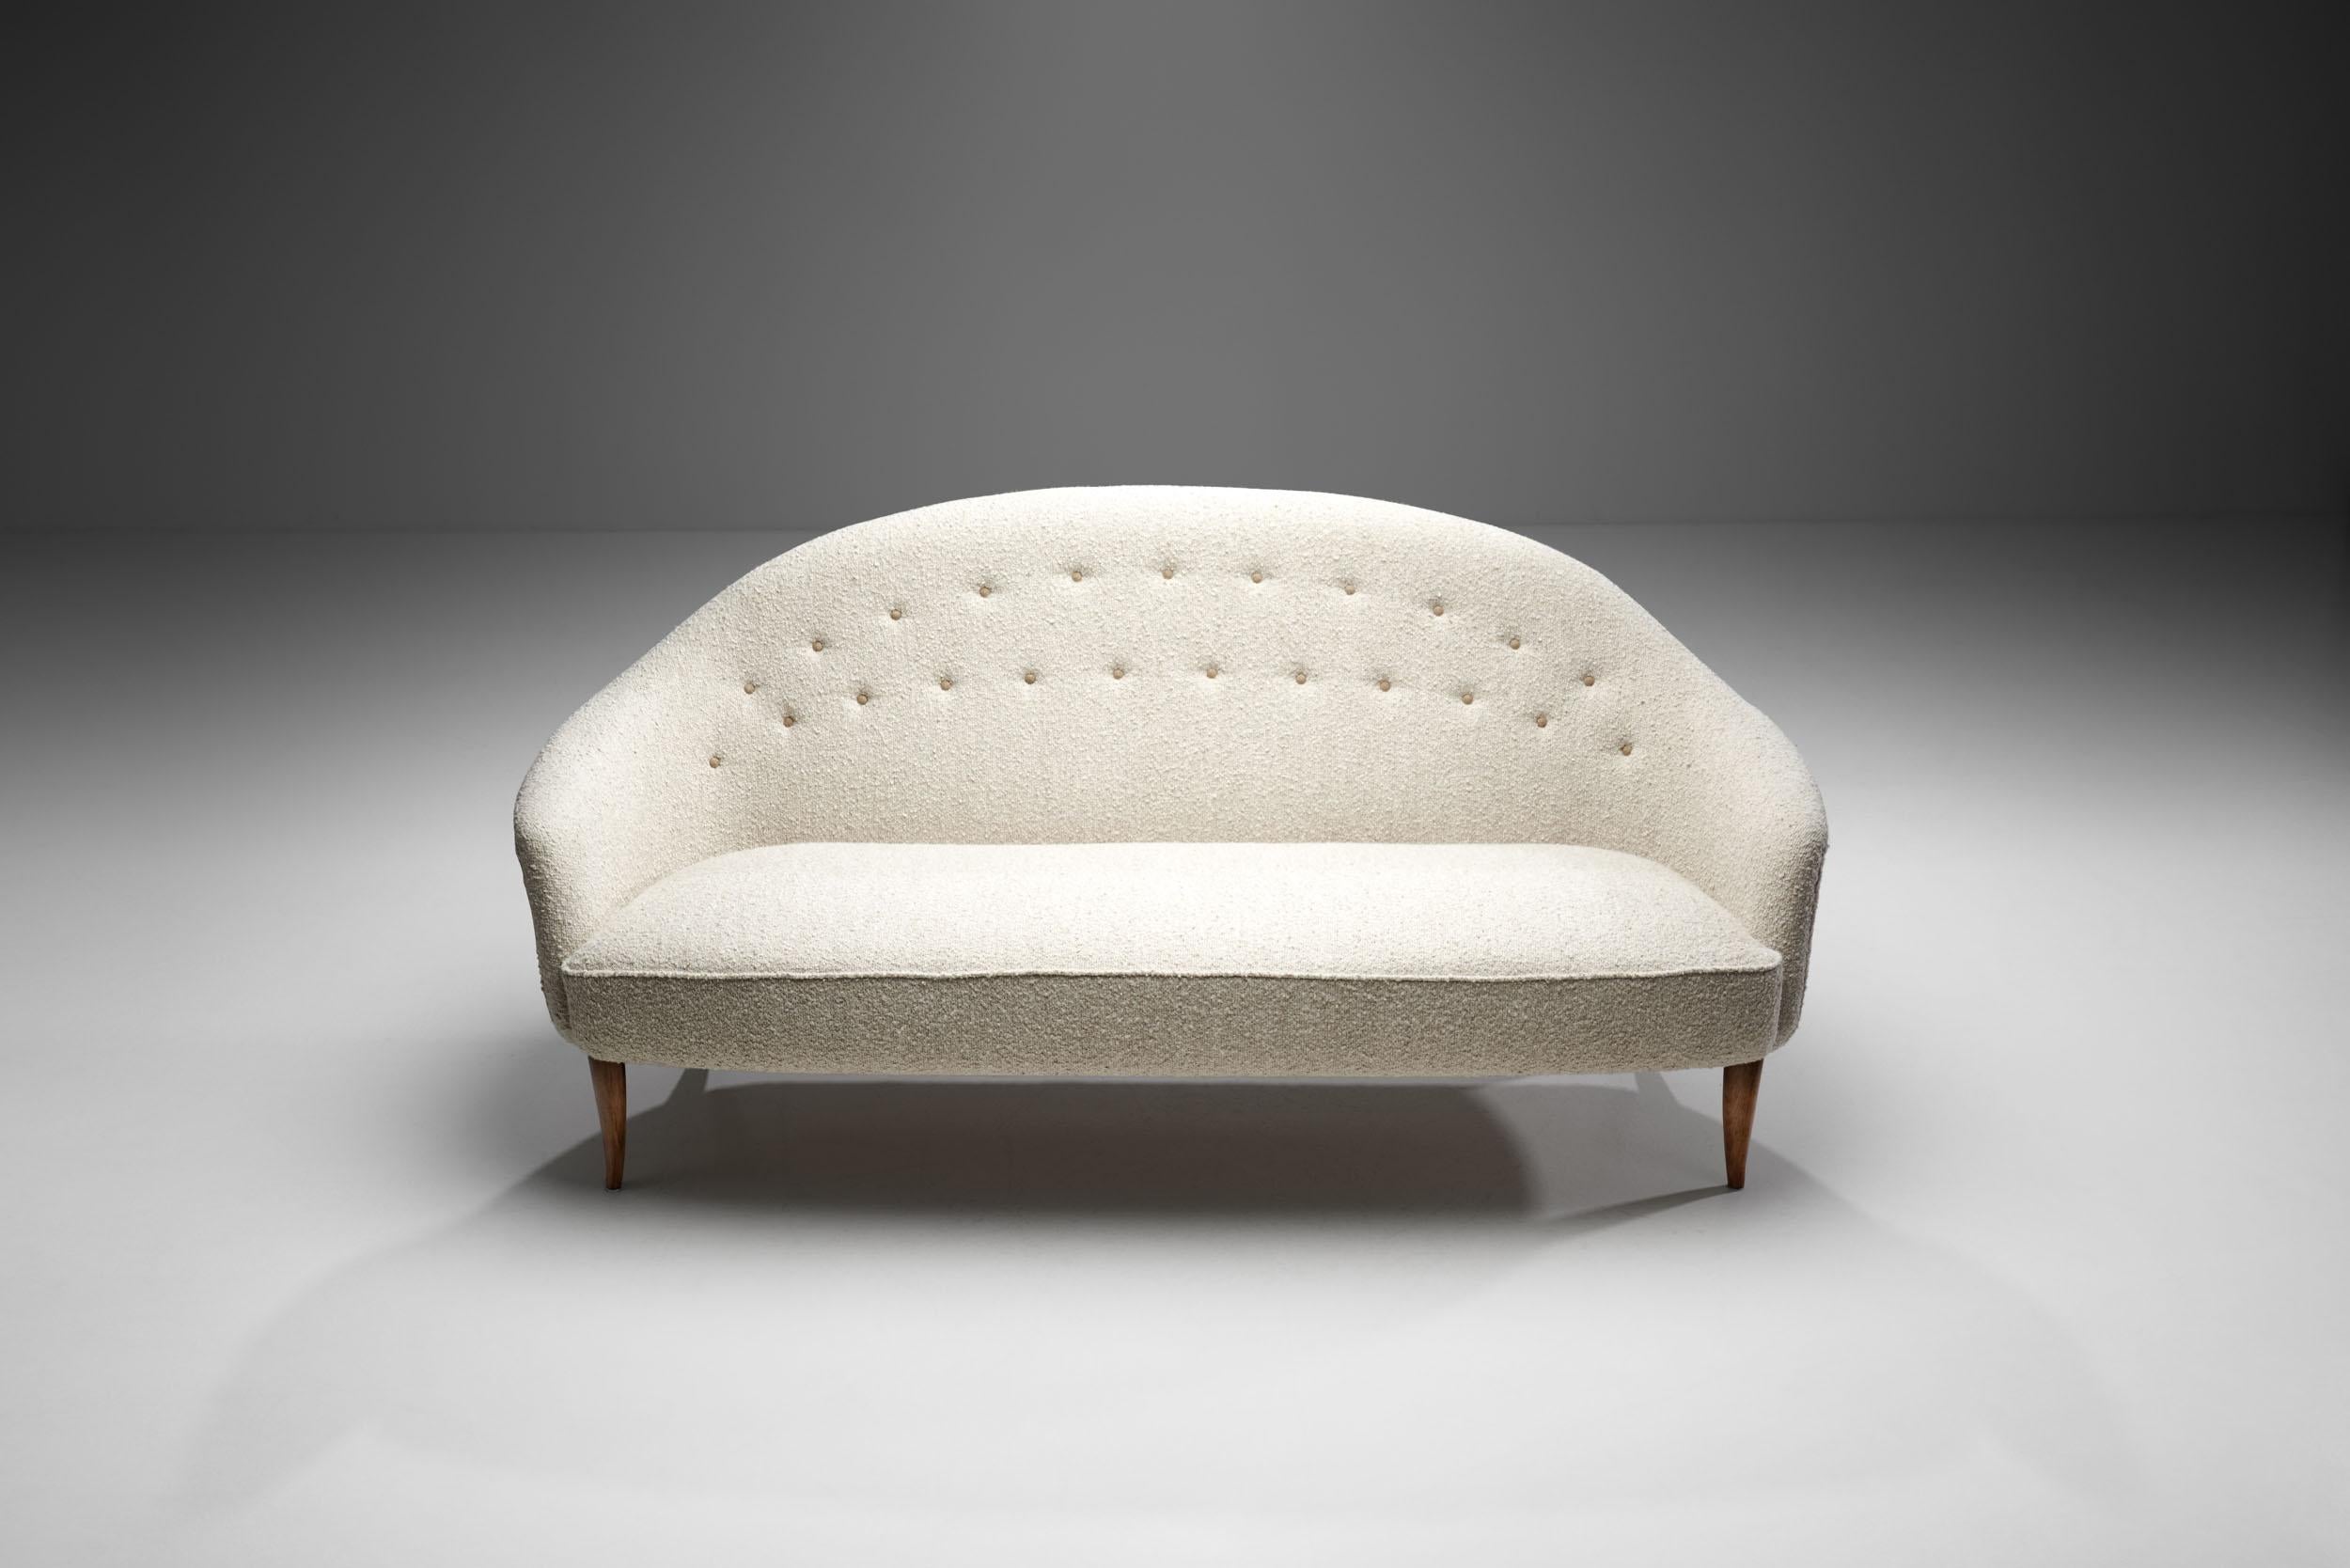 20th Century “Paradise” Sofa by Kerstin Hörlin-Holmquist, Sweden, 1958 For Sale